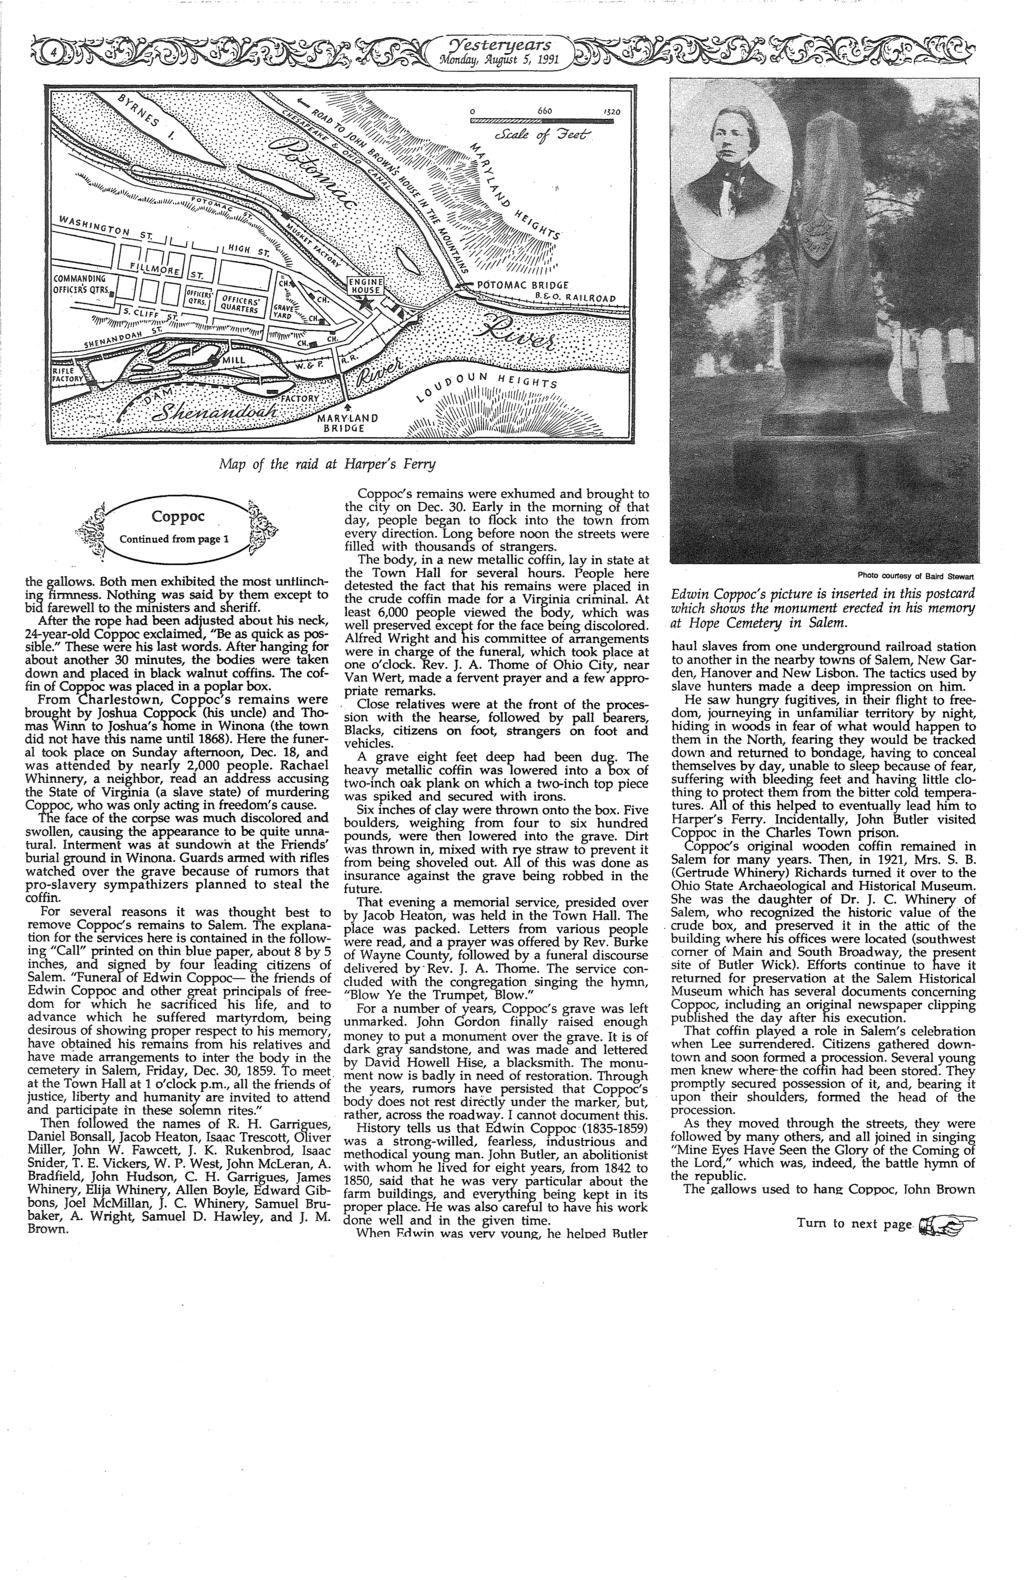 Yeseryears '.Monrfay,.91.ugus 5, 1991 660 1320 Map of he raid a Harper's Ferry.. ~~,'-~ppoc ~~ -~~- ~~;h,,~~-. ~:~,s4f Coninued from page 1 :'&;.J- ~~&7 he gallows.